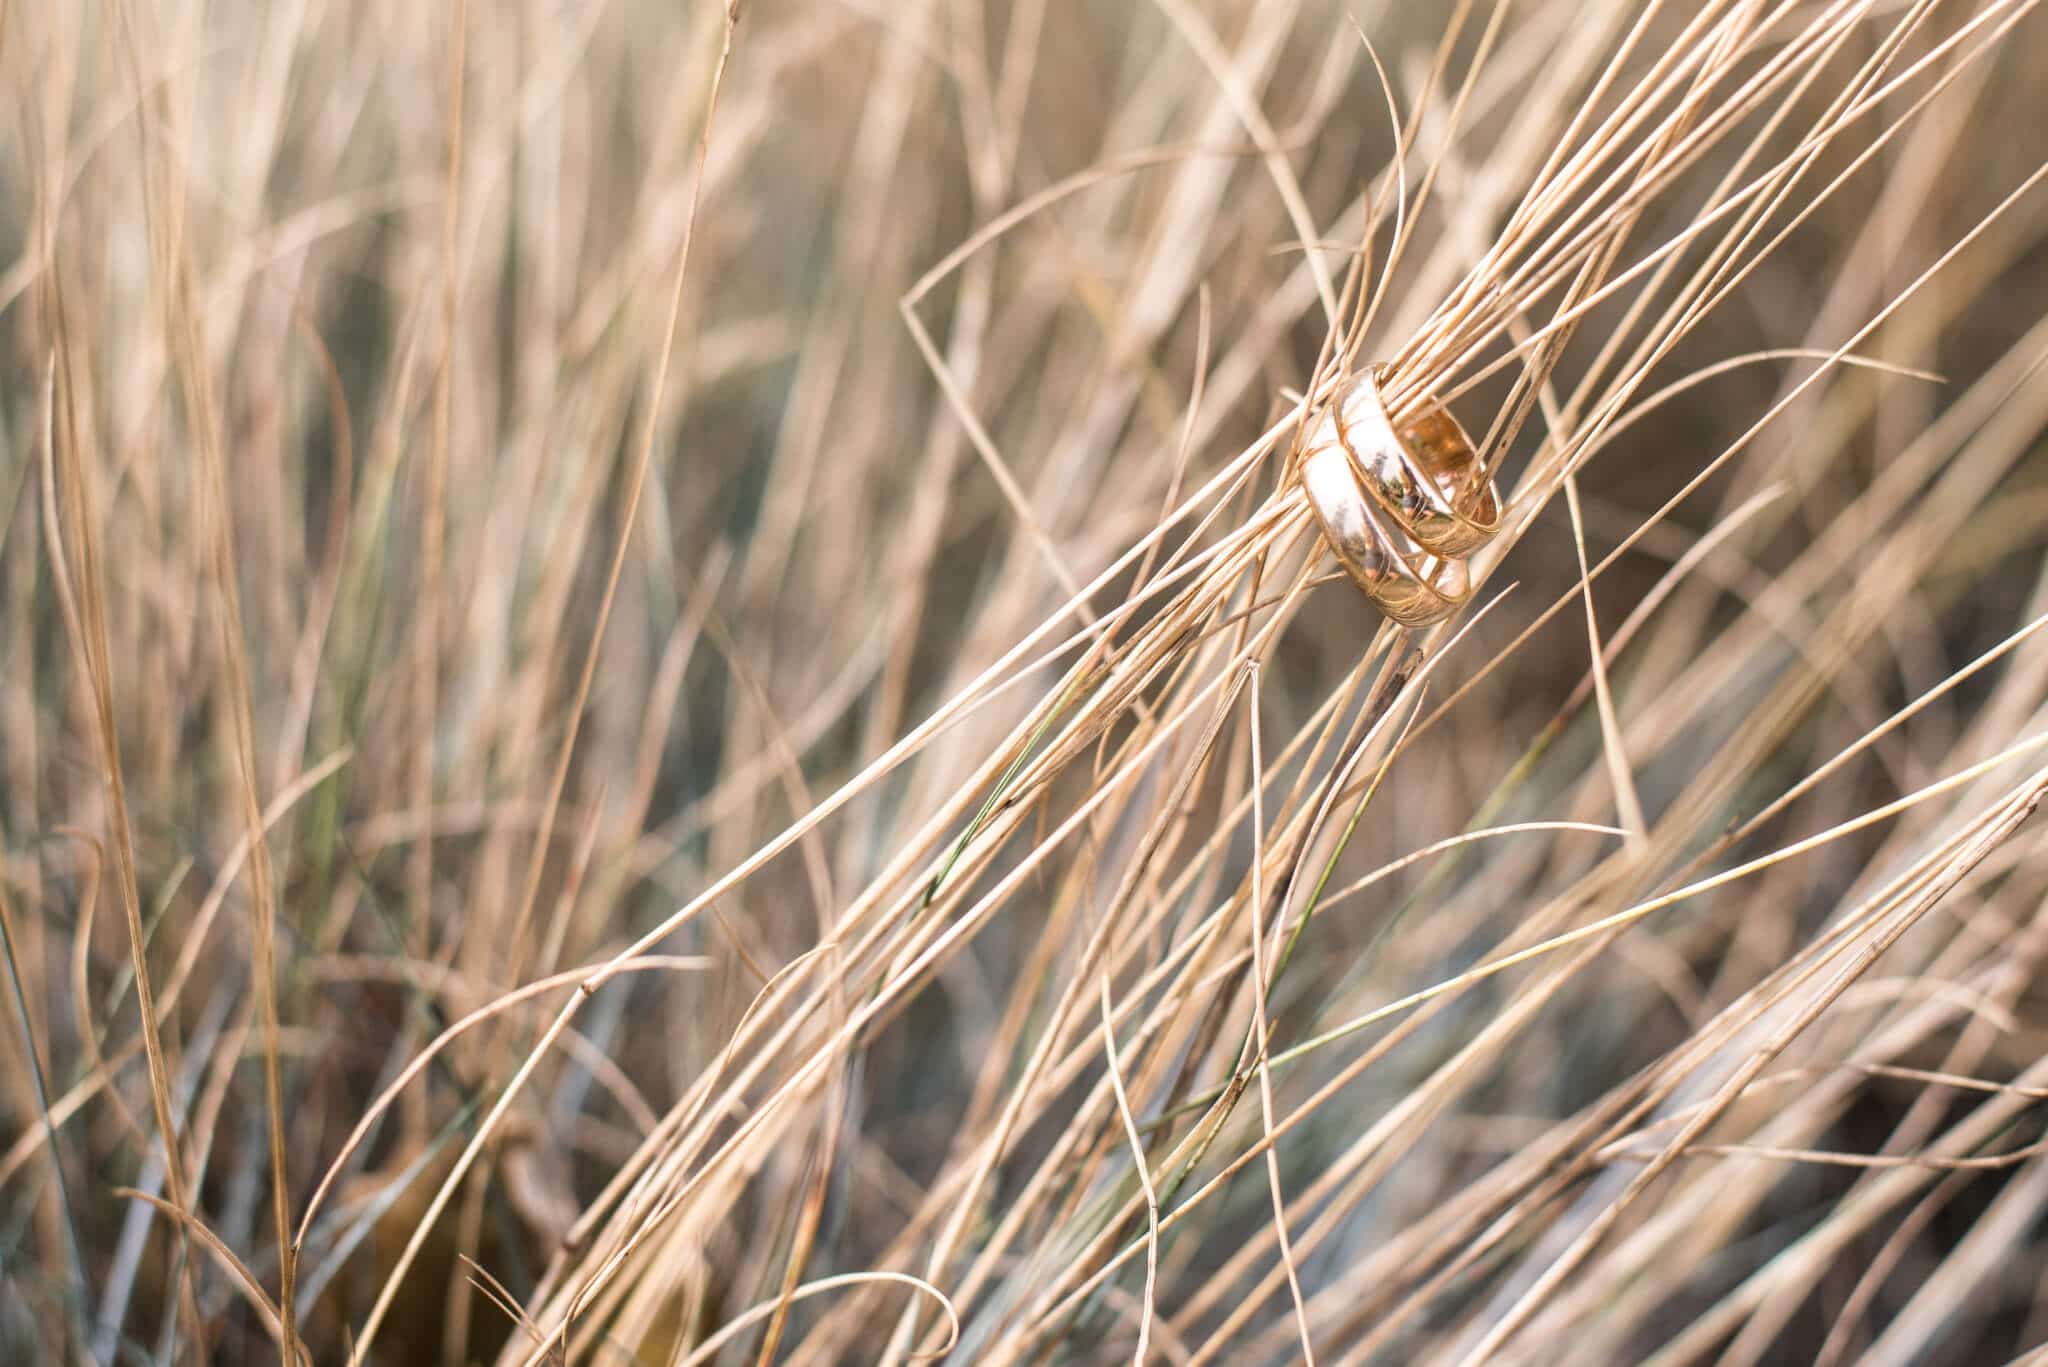 gold rings on stalks of straw